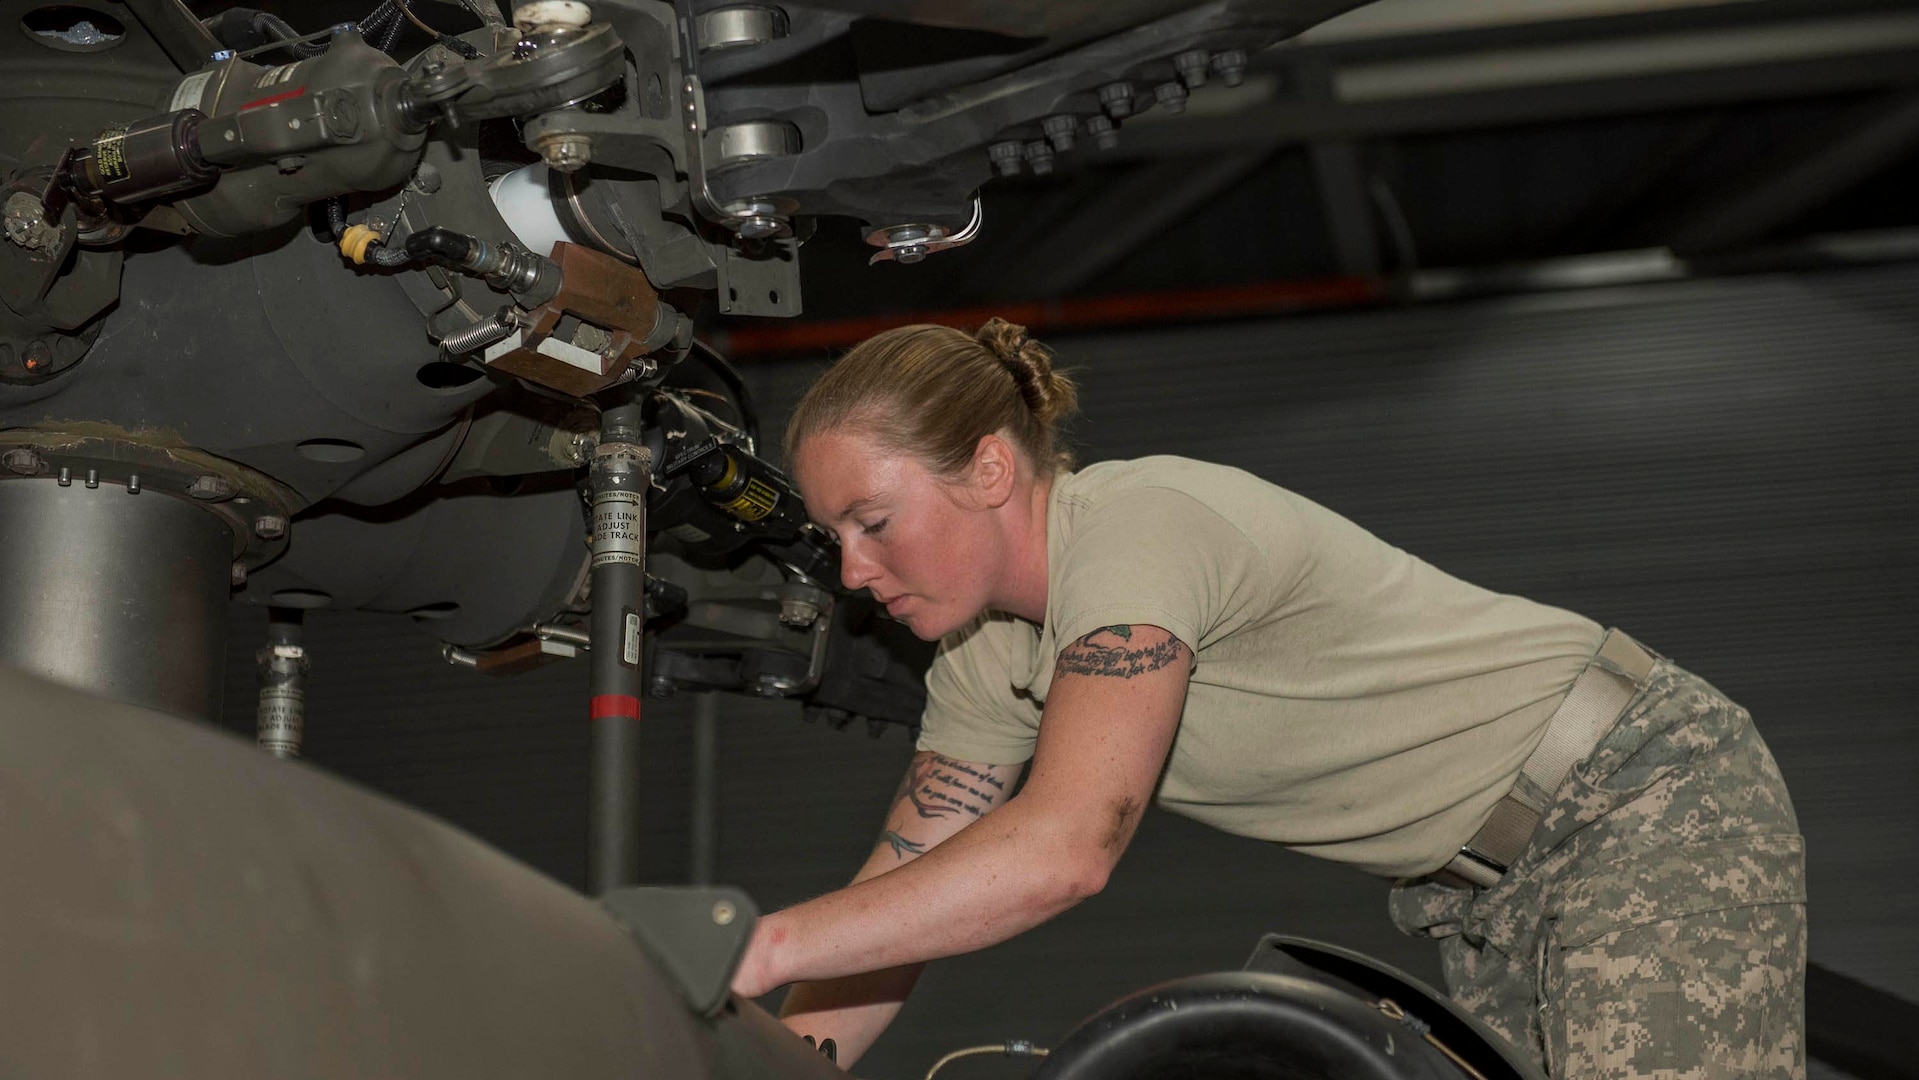 Black Hawk mechanic replaces a part on a helicopter.